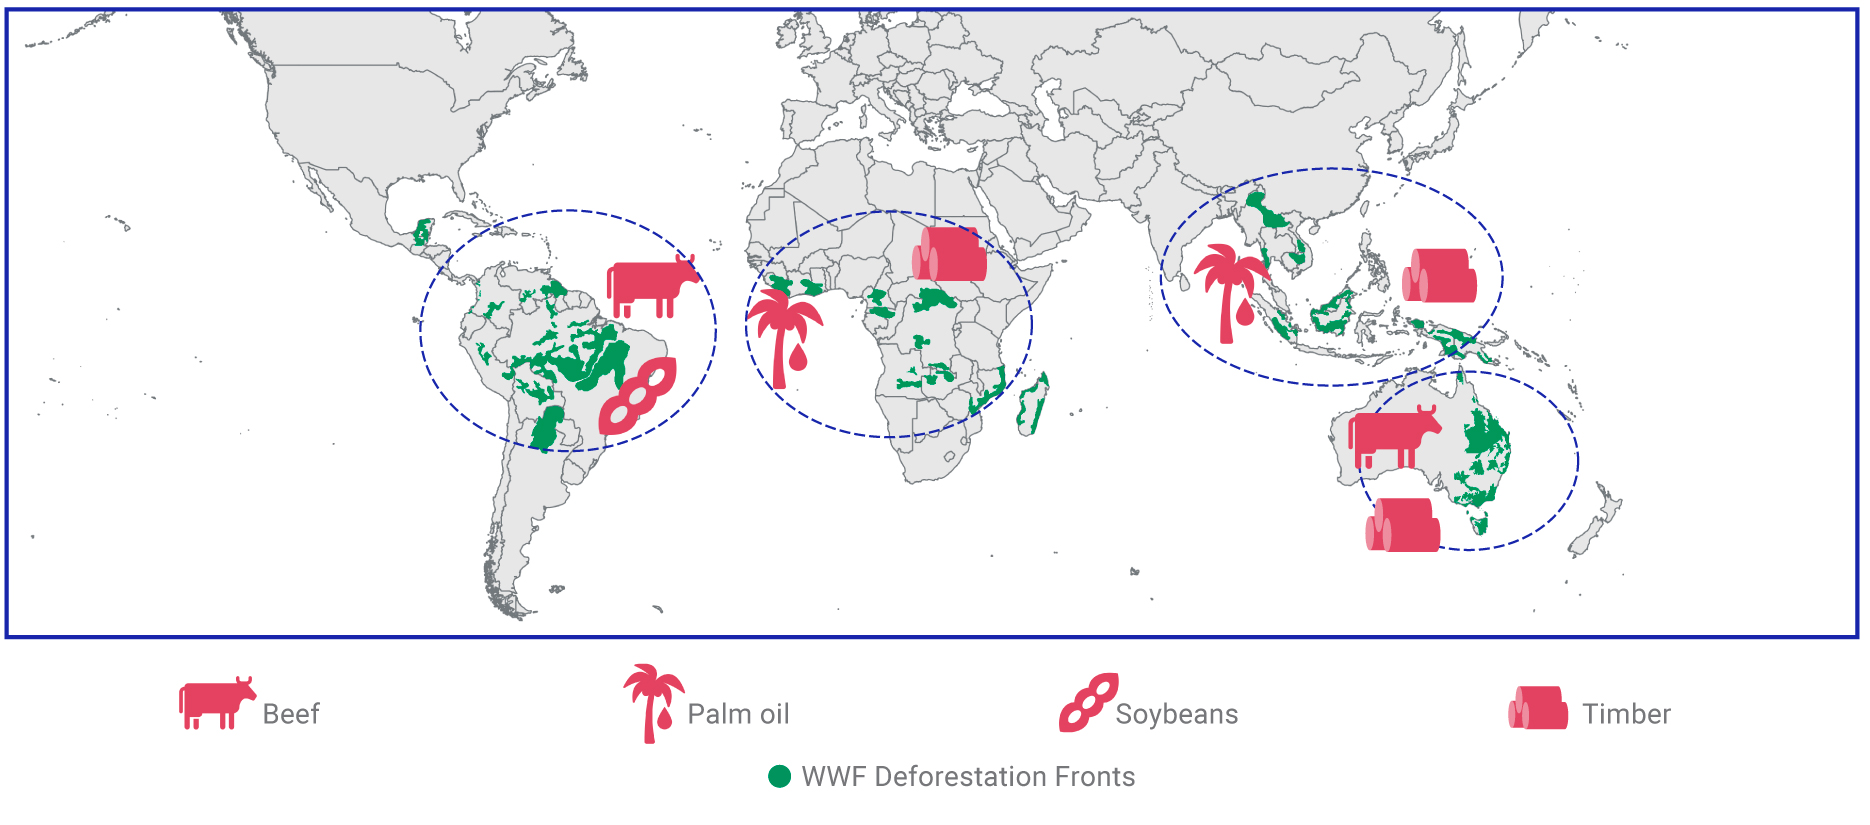 This chart shows the WWF Deforestation Fronts and the commodities causing them.